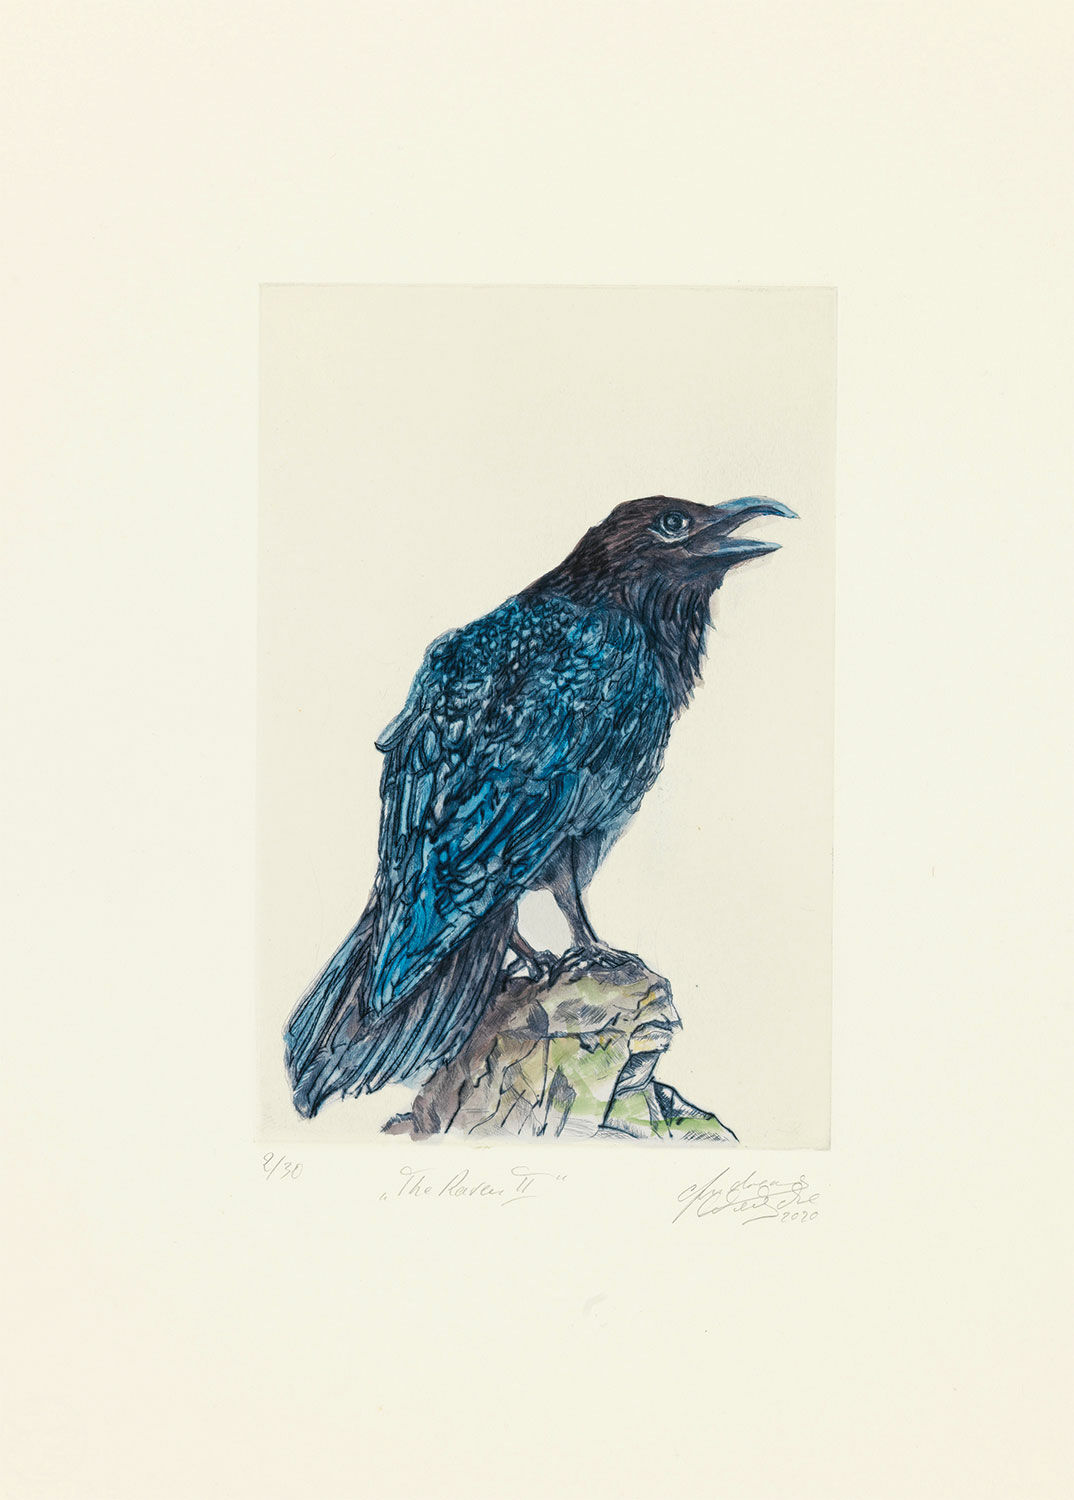 Picture "The Raven II" (2020), unframed by Andreas Weische